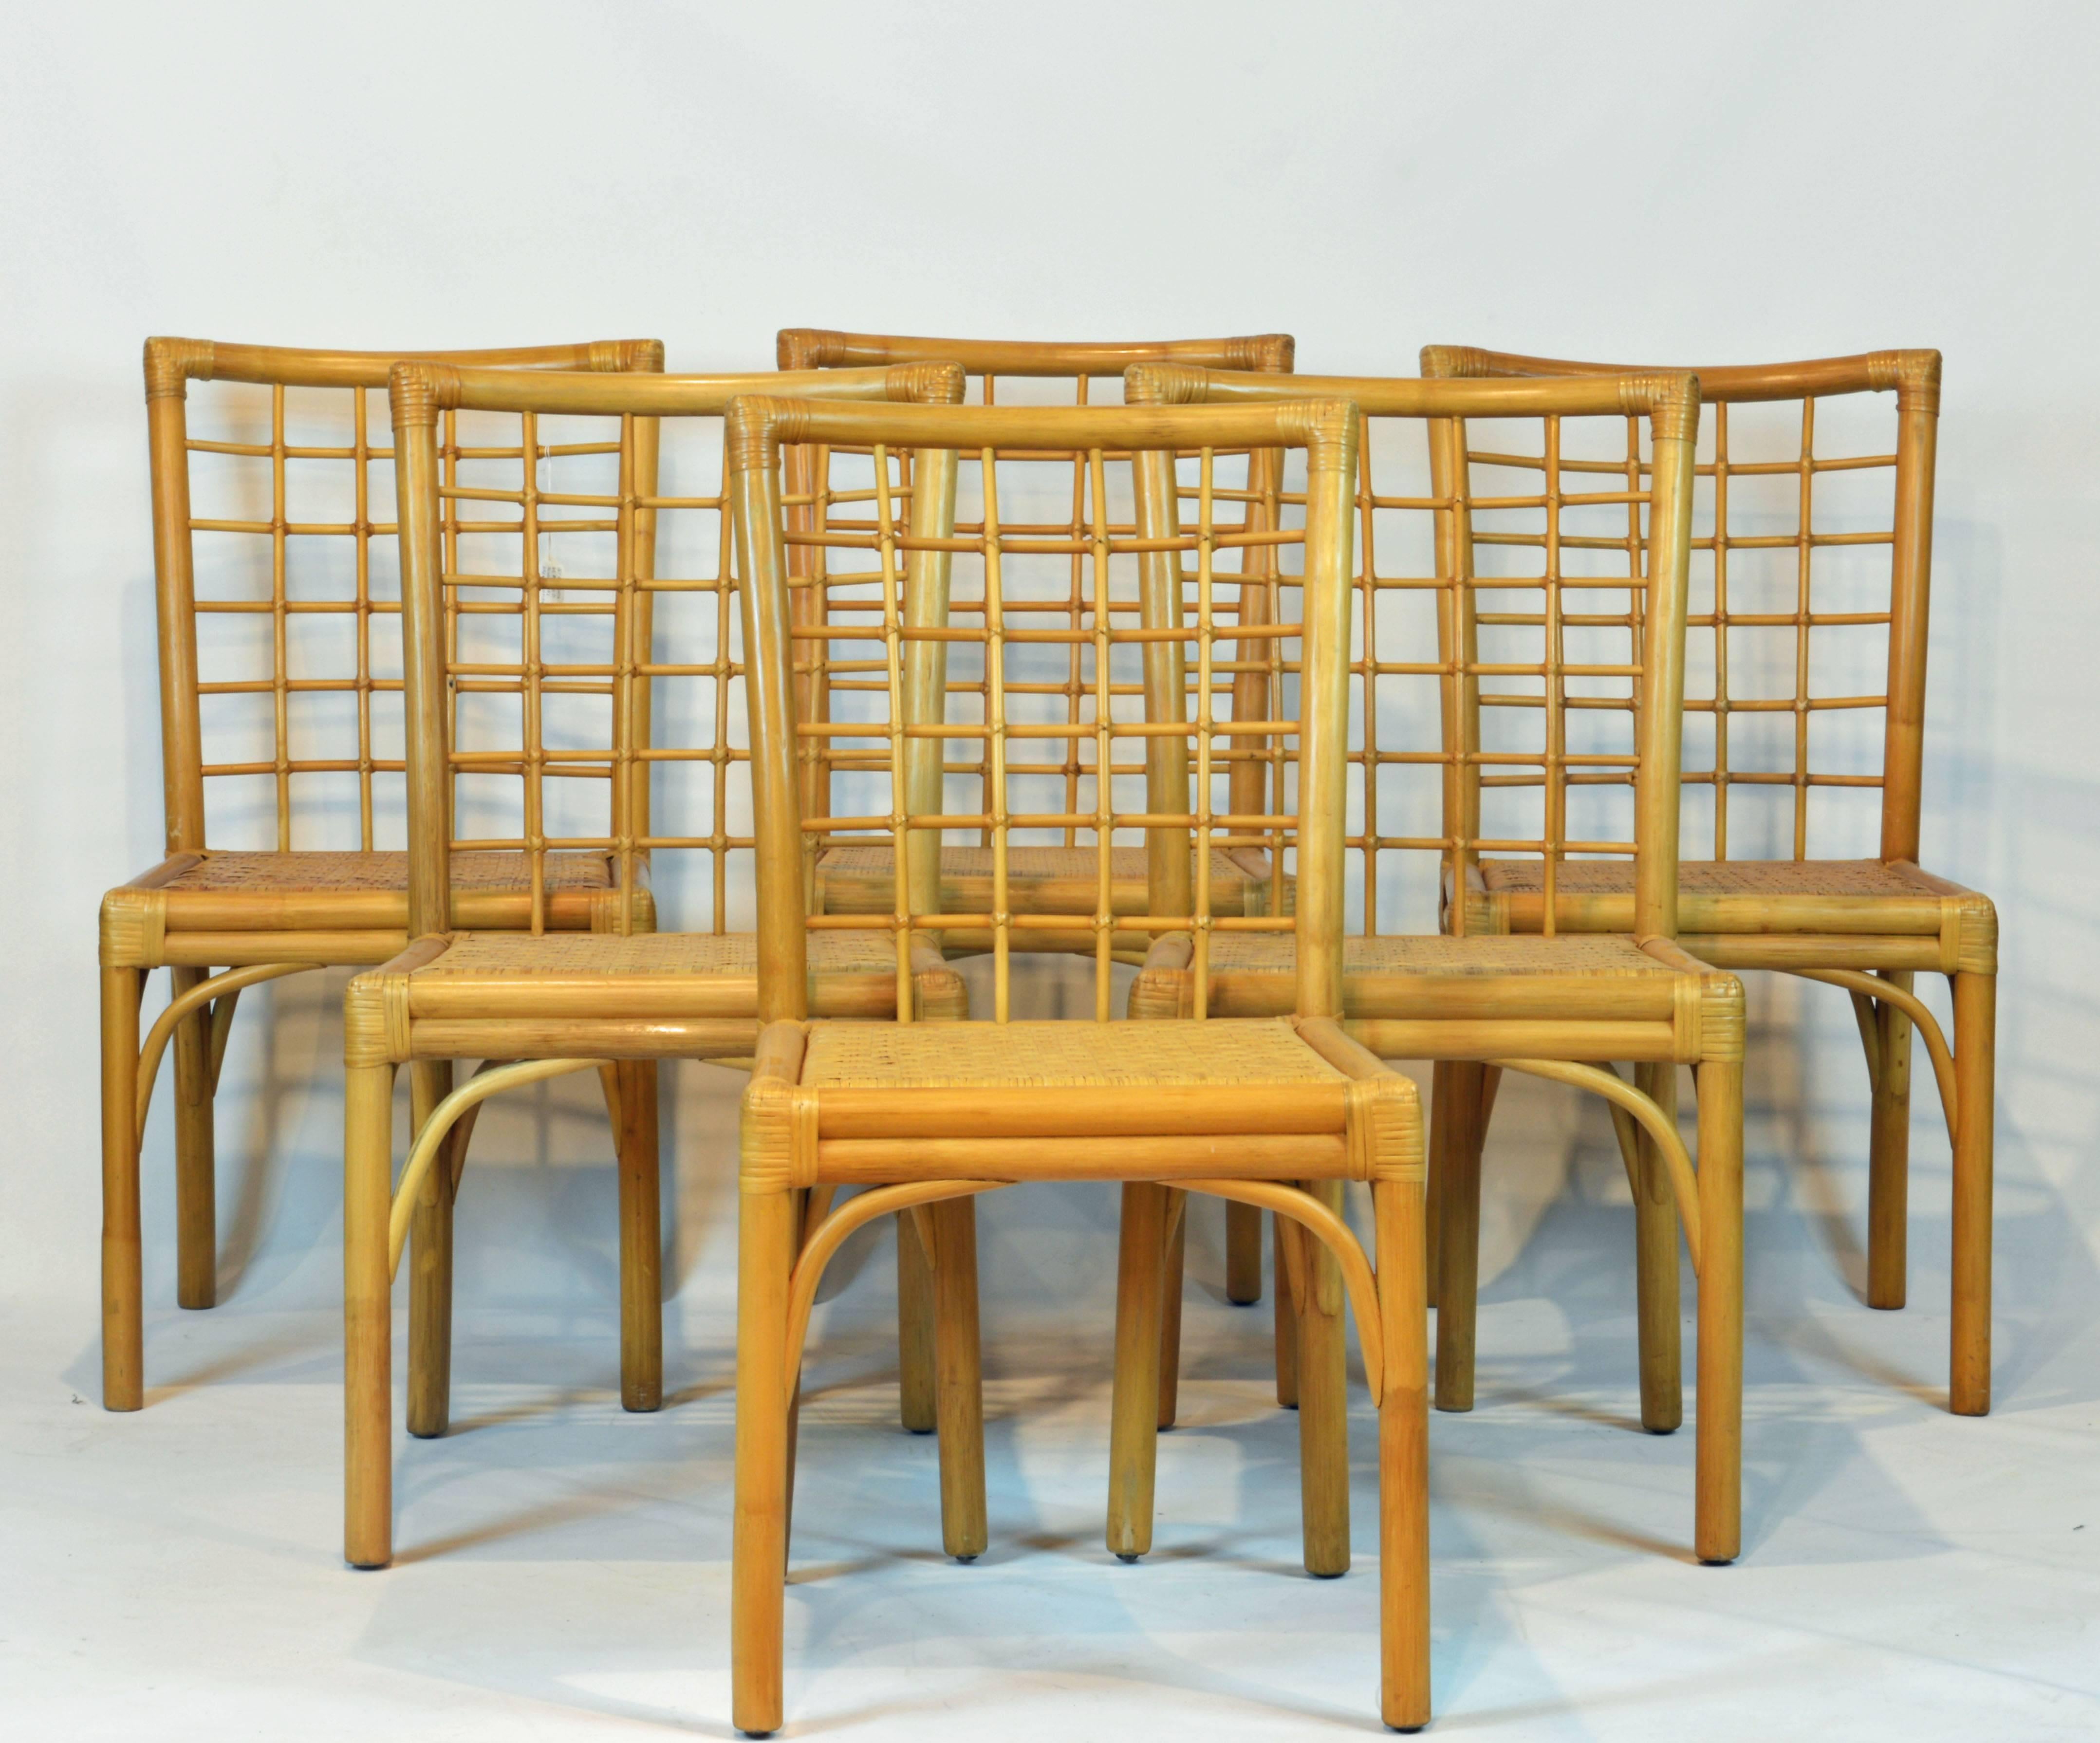 Based on a modernized Chinoiserie Chippendale design concept these chairs make a bright contemporary tropical impression. Gently used, all the chairs are in excellent condition.